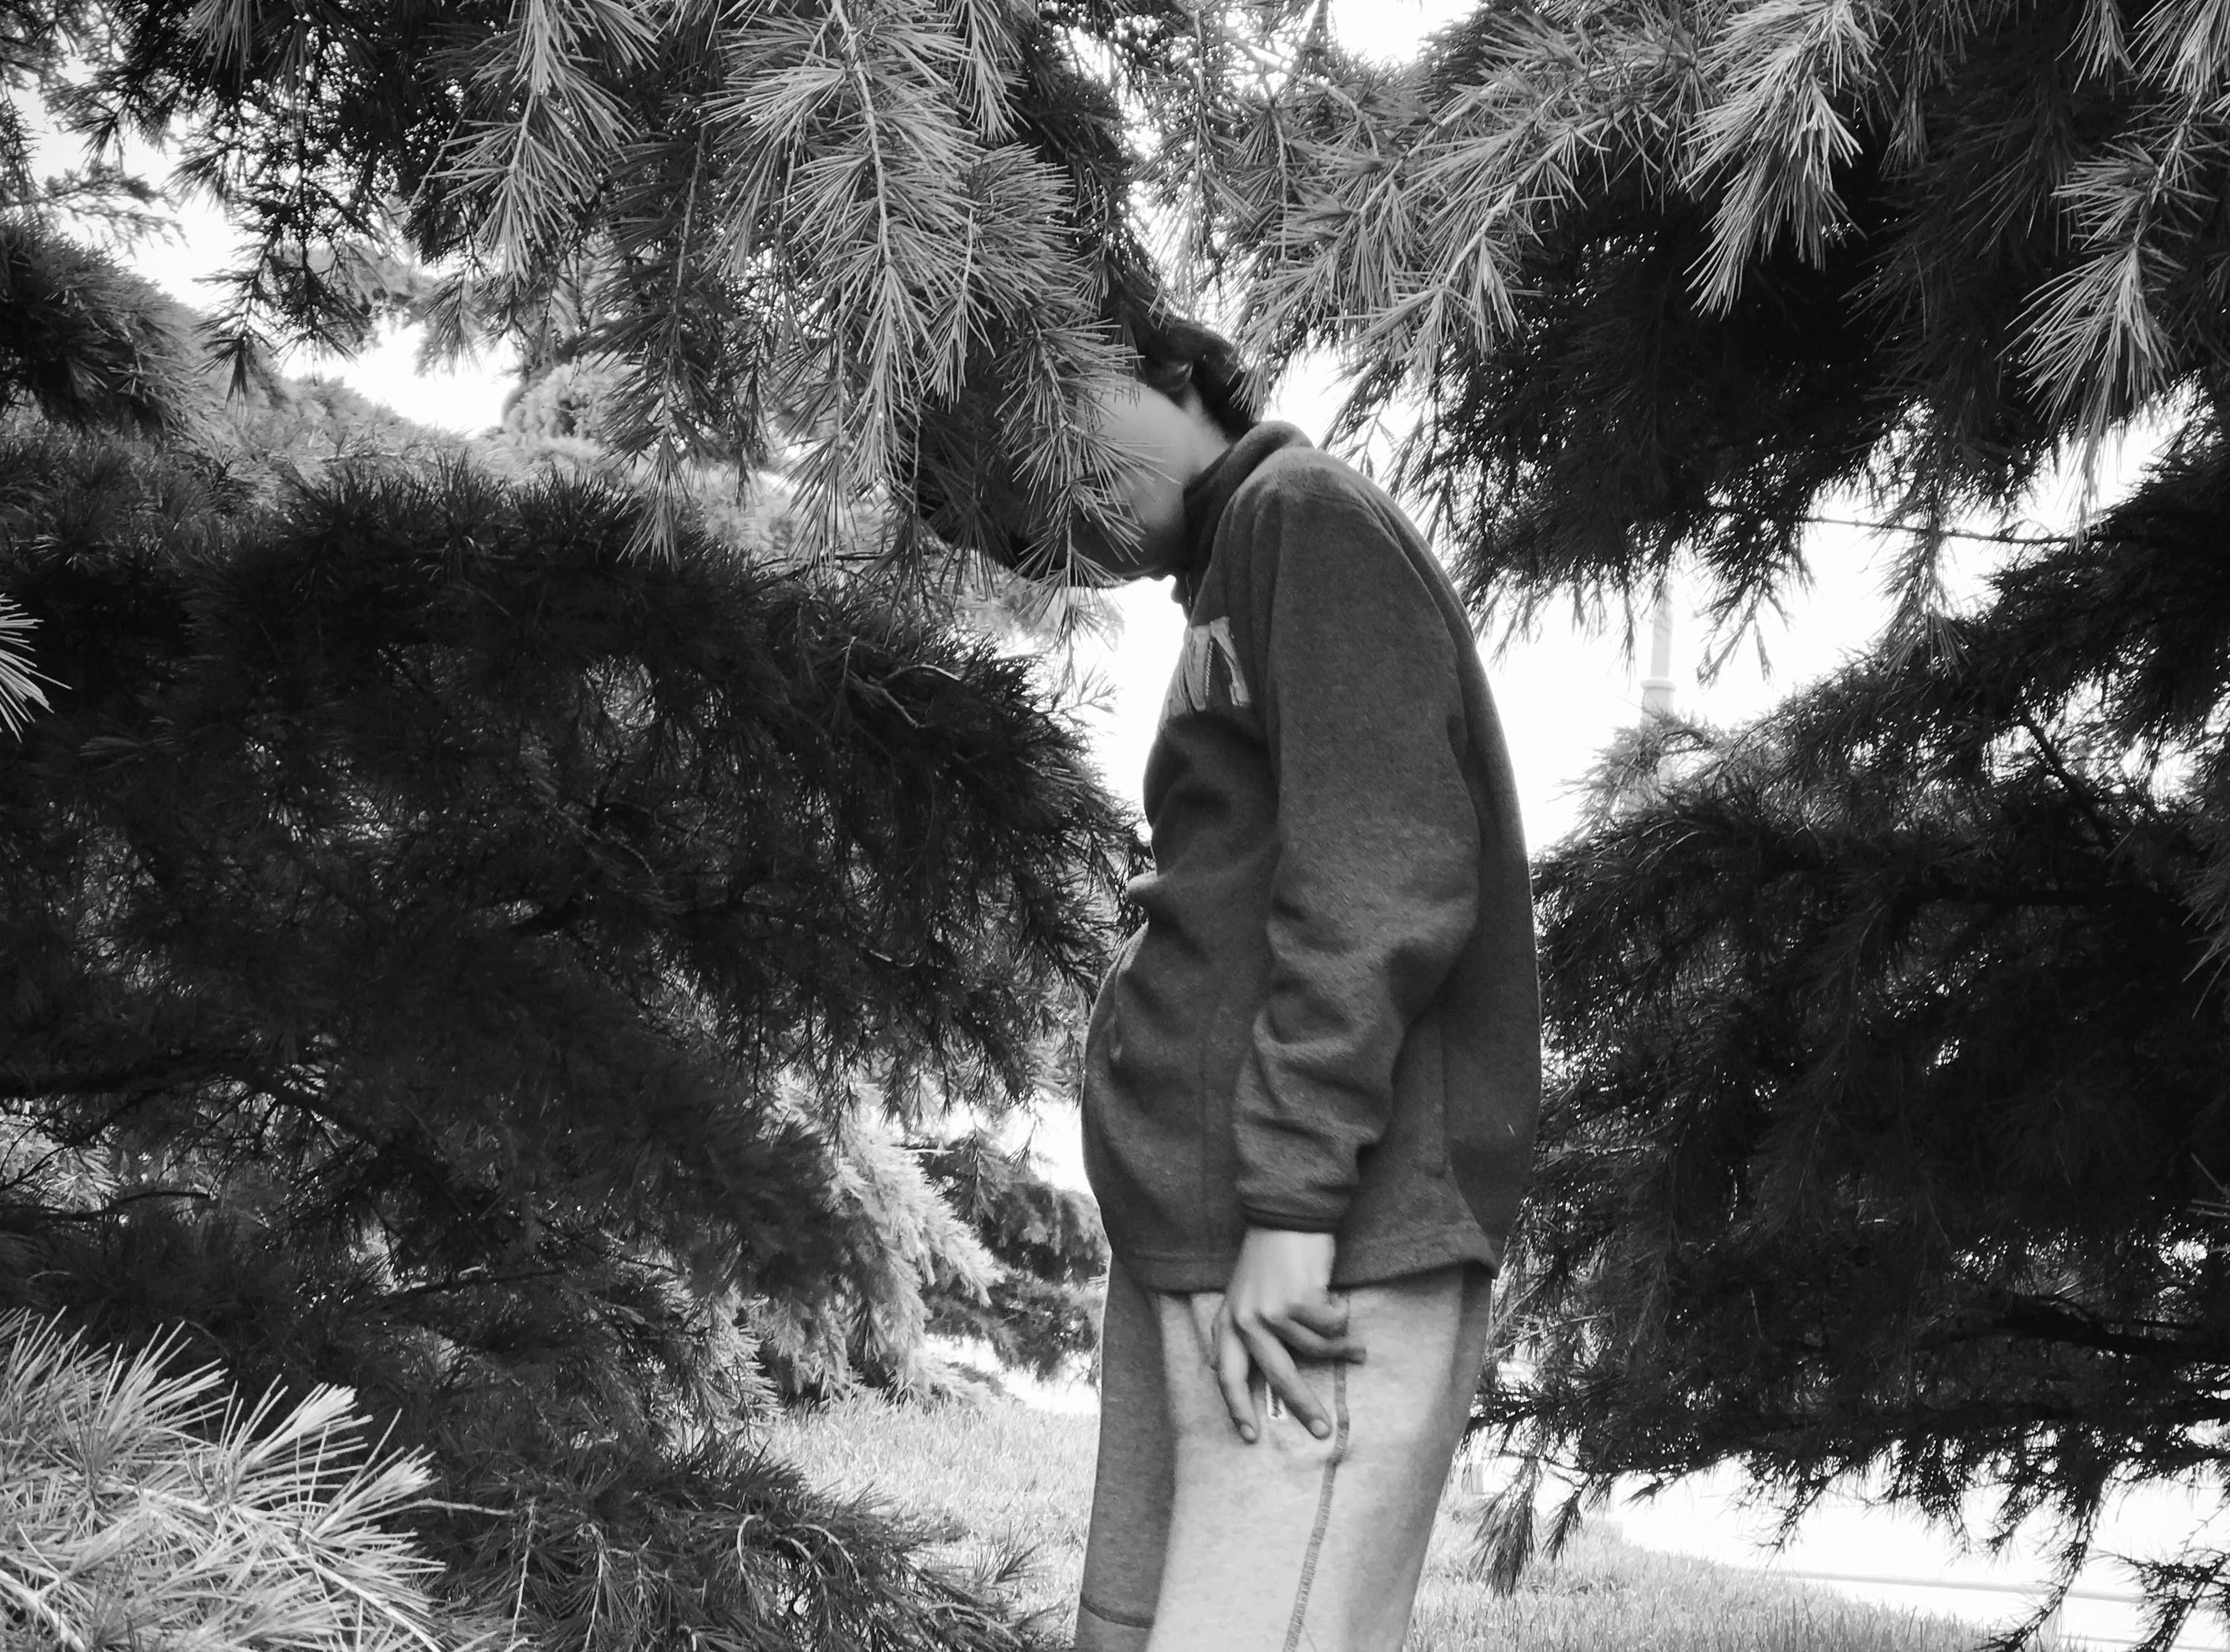 Boy with head in pine tree branches in black and white